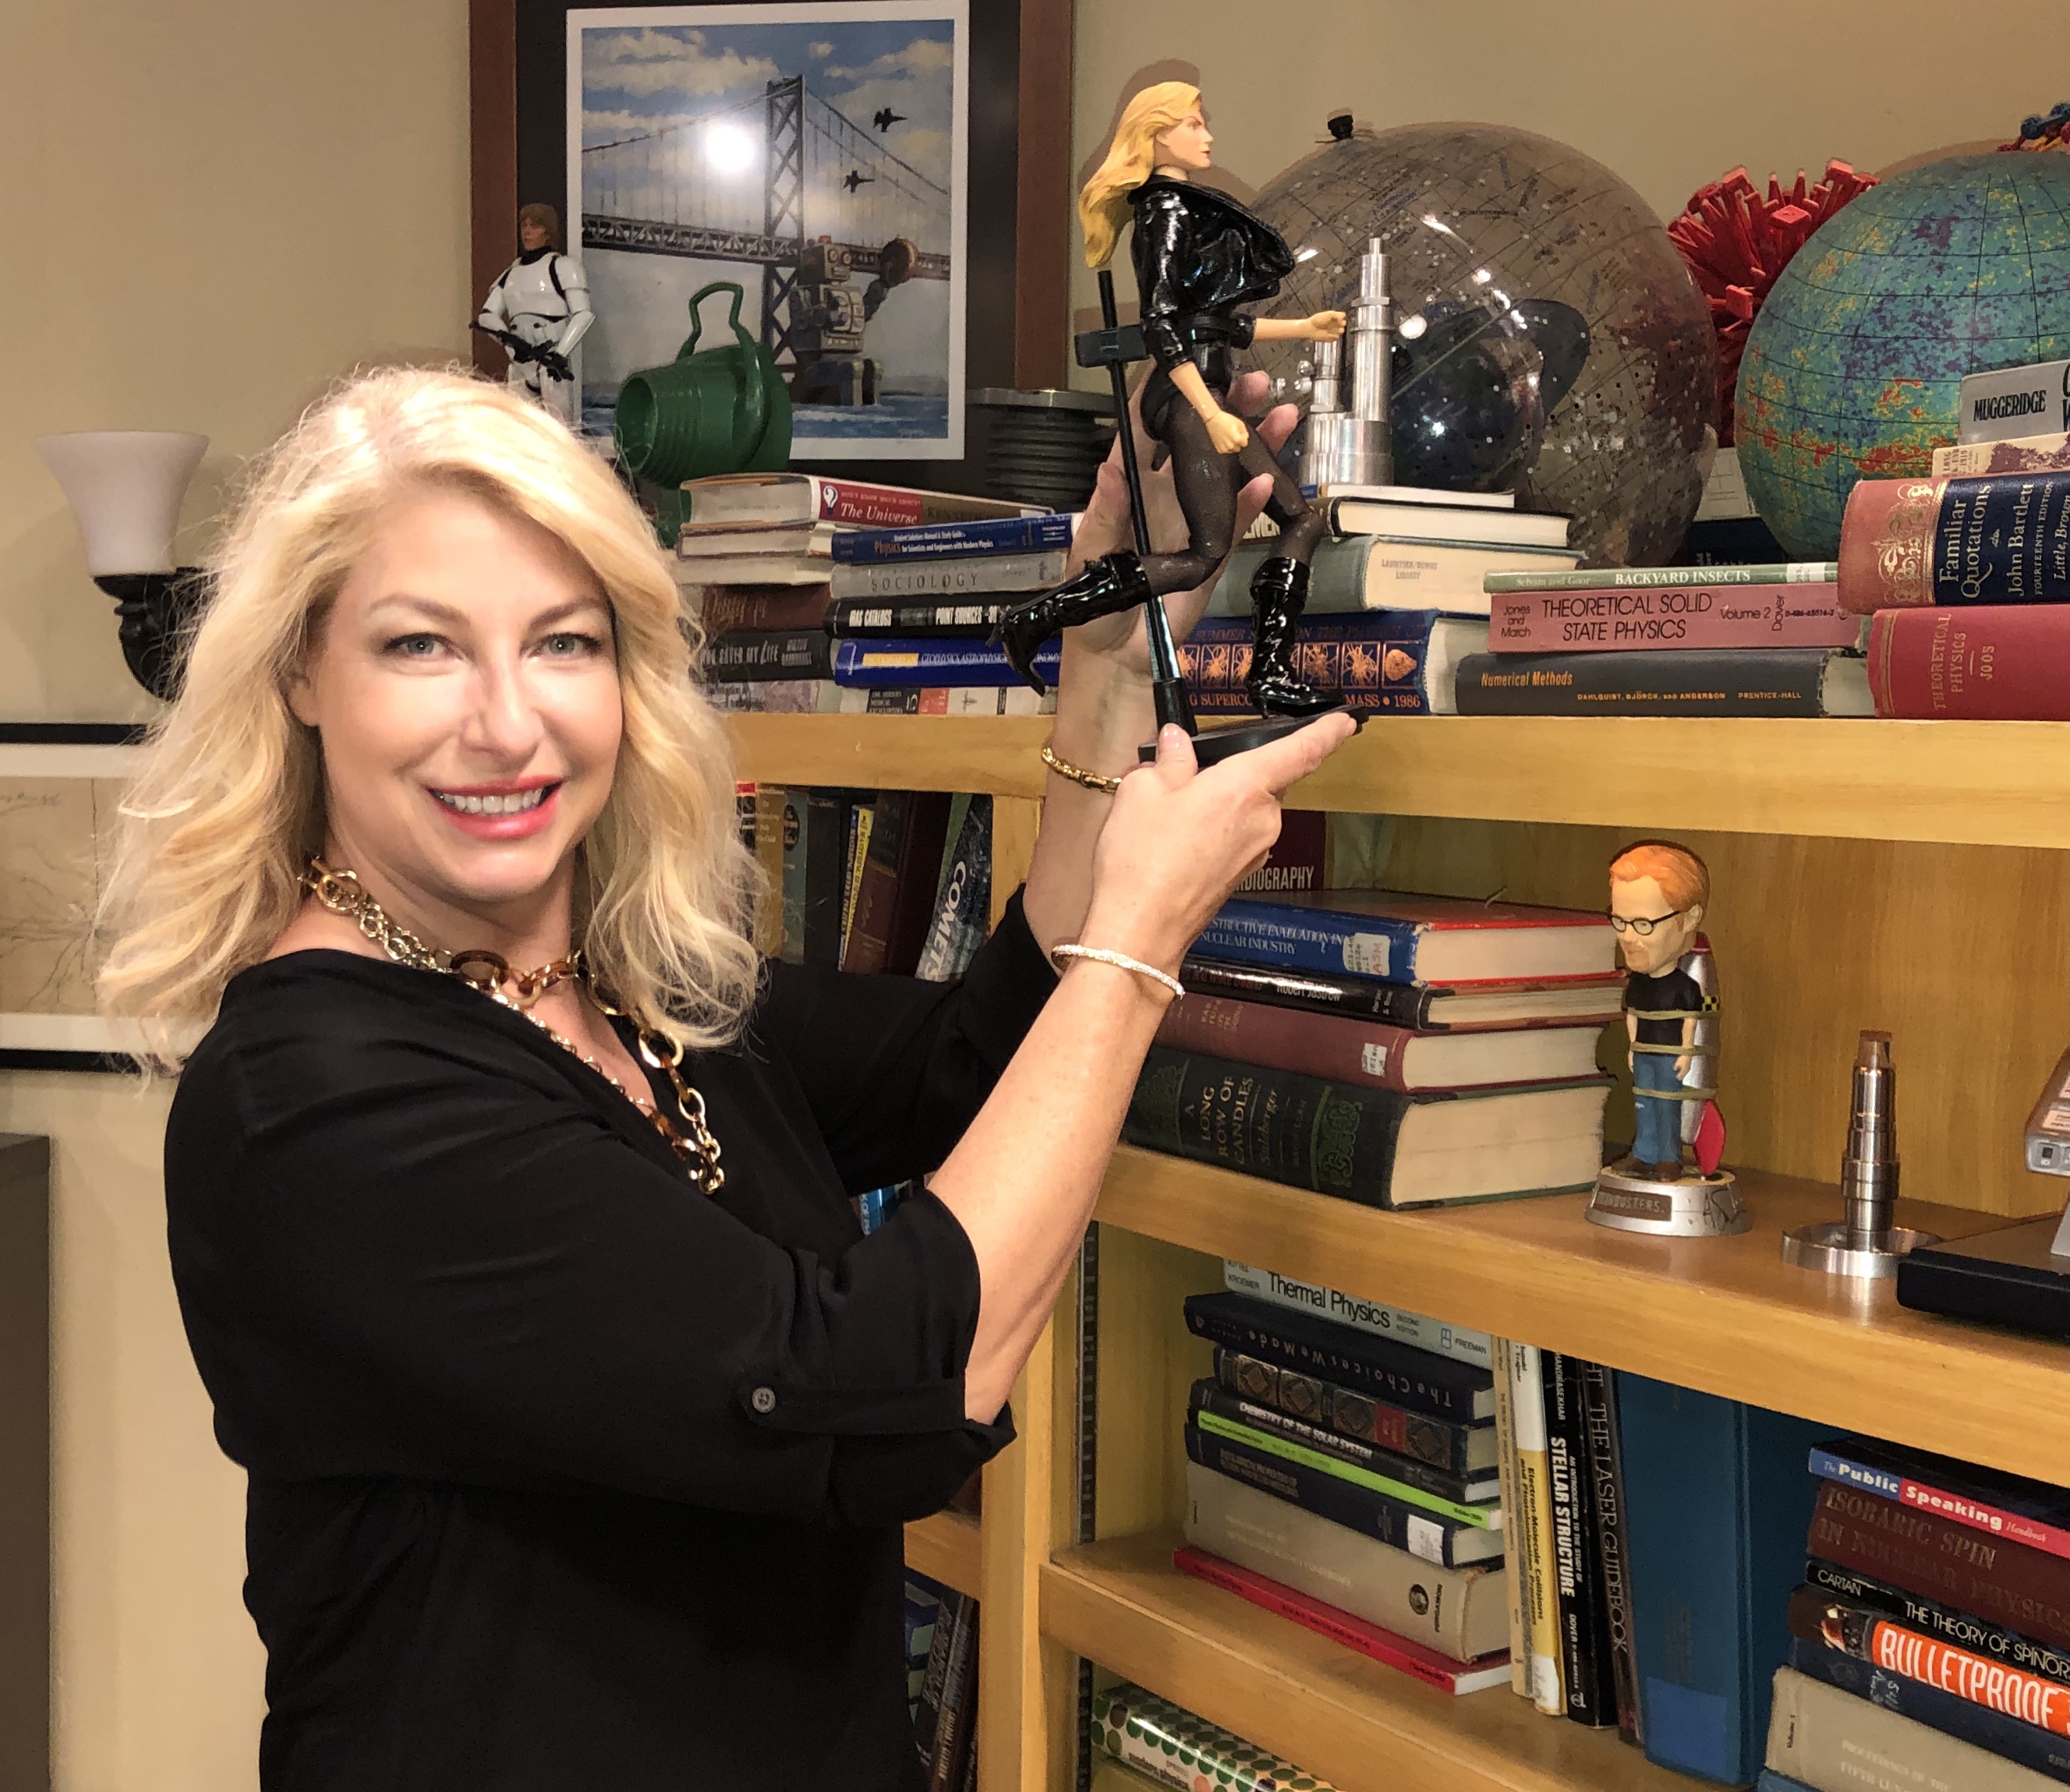 Ann Shea displaying a prop from the Big Bang Theory living room scene